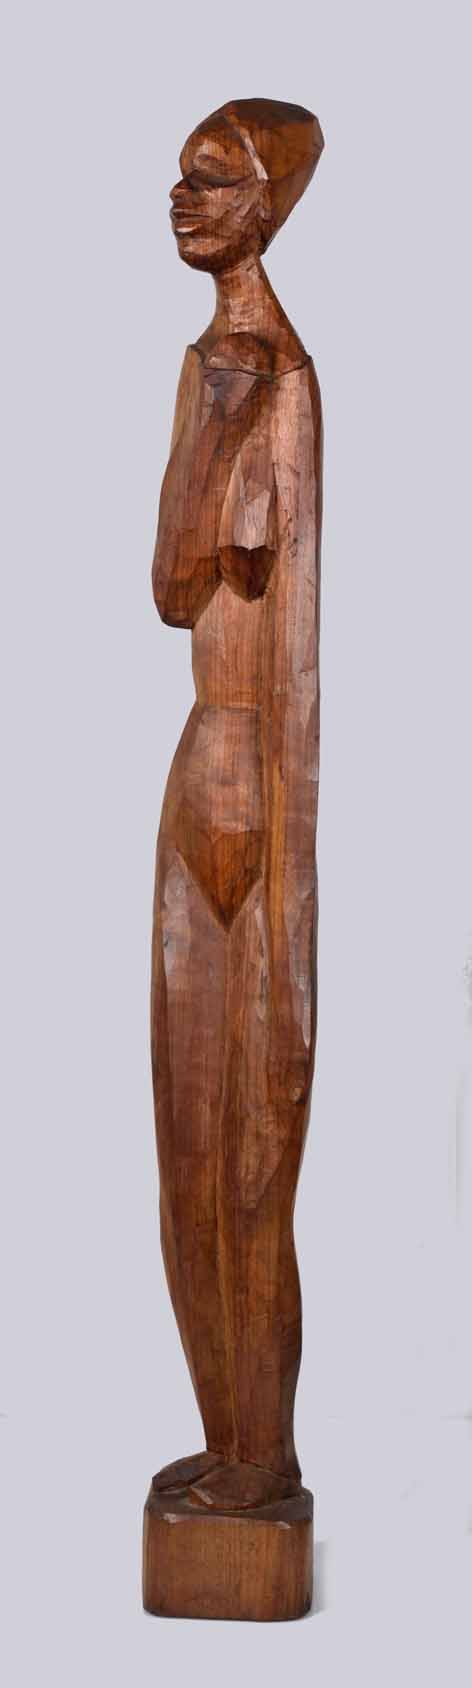 Michael Gagashe Zondi (South African 1926-2008) STANDING FIGURE signed and dated 1970 wood height: